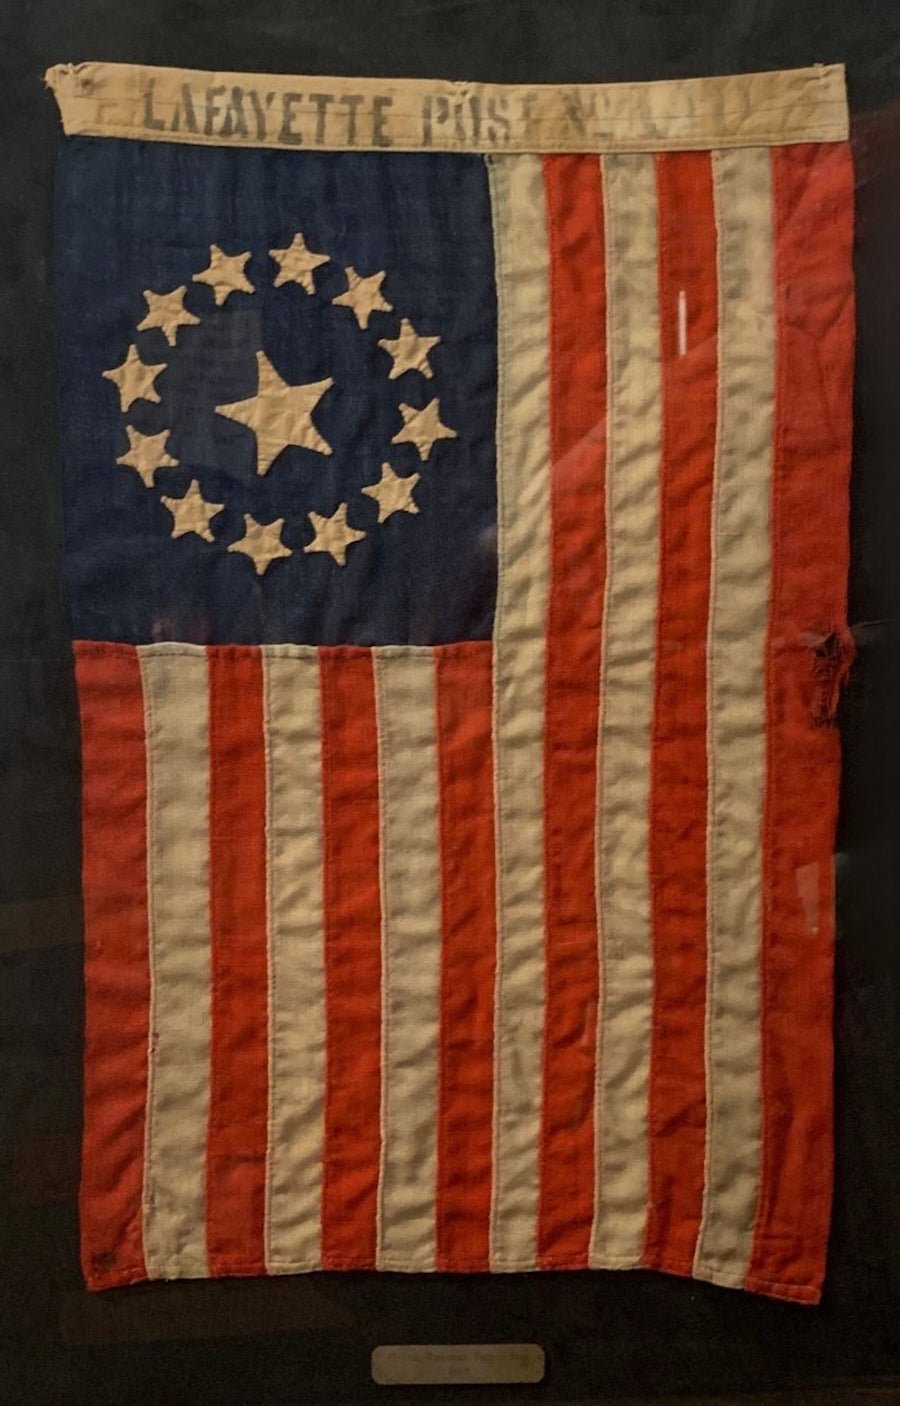 13 - Star American Parade Flag, 1860 - The Great Republic